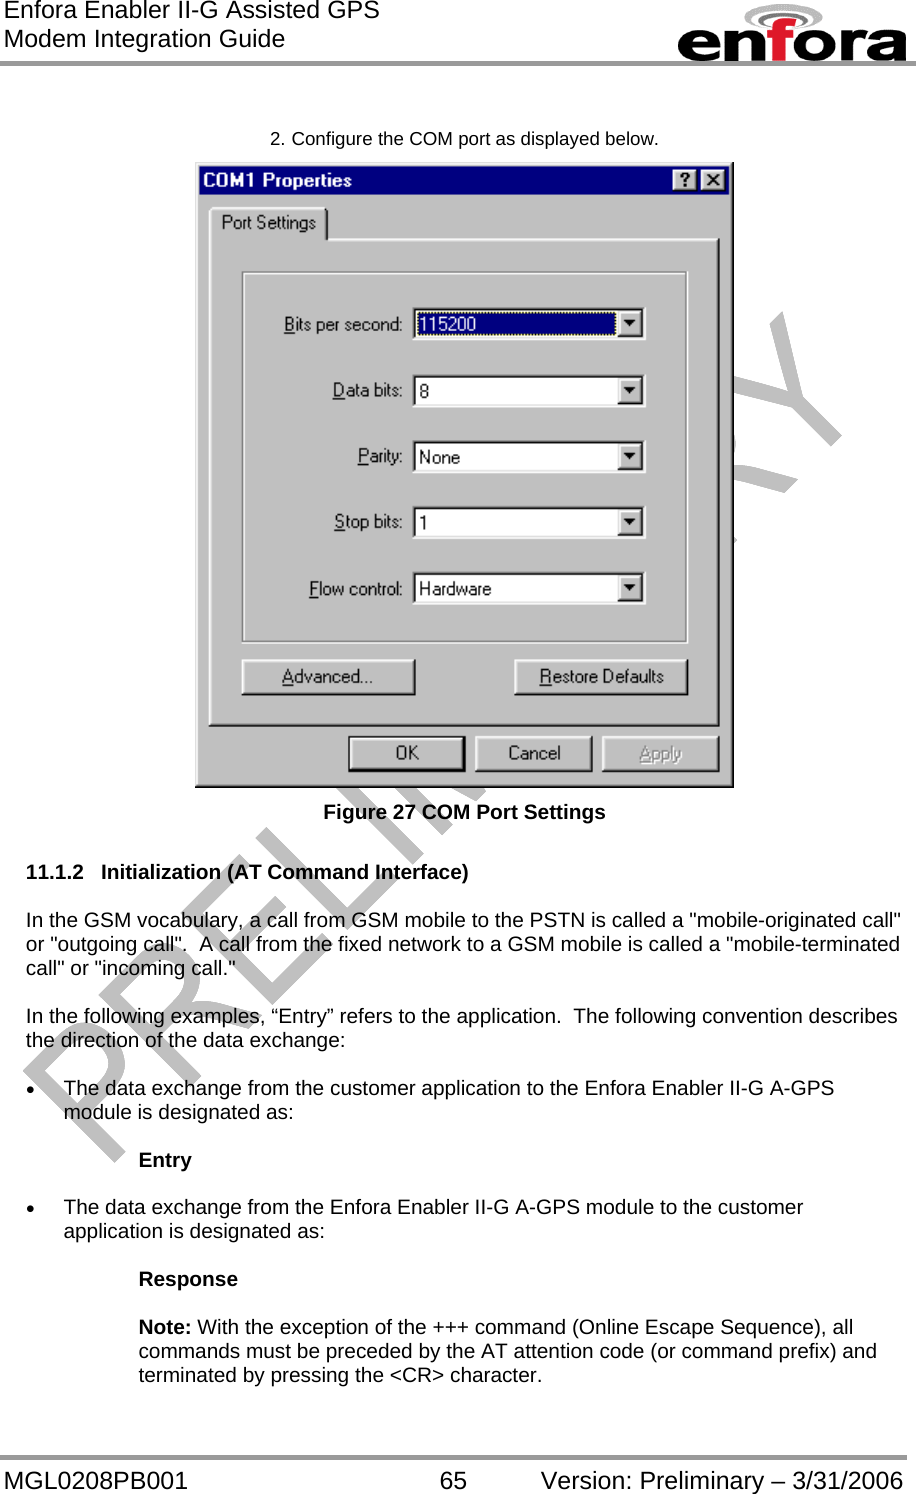 Enfora Enabler II-G Assisted GPS Modem Integration Guide MGL0208PB001 65 Version: Preliminary – 3/31/2006  2. Configure the COM port as displayed below.  Figure 27 COM Port Settings  11.1.2  Initialization (AT Command Interface)  In the GSM vocabulary, a call from GSM mobile to the PSTN is called a &quot;mobile-originated call&quot; or &quot;outgoing call&quot;.  A call from the fixed network to a GSM mobile is called a &quot;mobile-terminated call&quot; or &quot;incoming call.&quot;  In the following examples, “Entry” refers to the application.  The following convention describes the direction of the data exchange:  •  The data exchange from the customer application to the Enfora Enabler II-G A-GPS module is designated as:  Entry  •  The data exchange from the Enfora Enabler II-G A-GPS module to the customer application is designated as:  Response  Note: With the exception of the +++ command (Online Escape Sequence), all commands must be preceded by the AT attention code (or command prefix) and terminated by pressing the &lt;CR&gt; character.  